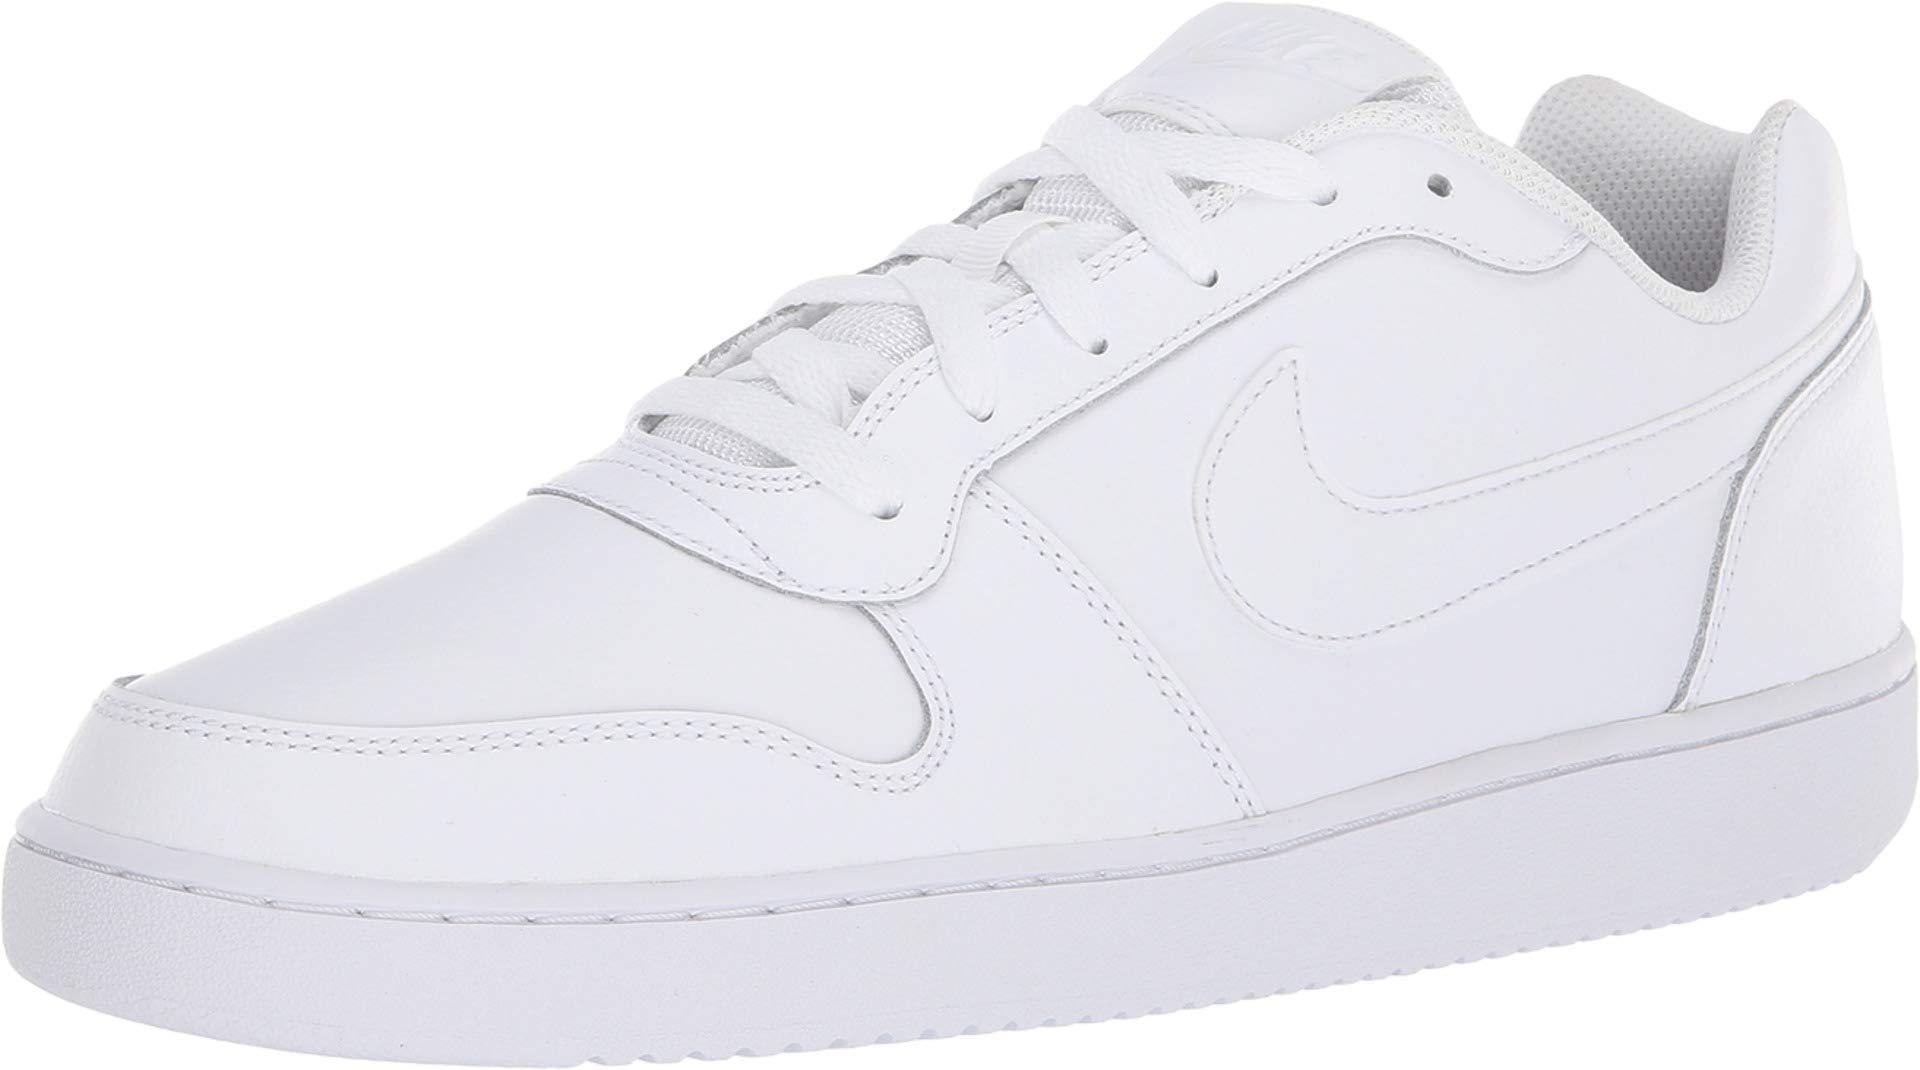 Nike Ebernon Low Basketball Shoes in White for Men - Lyst